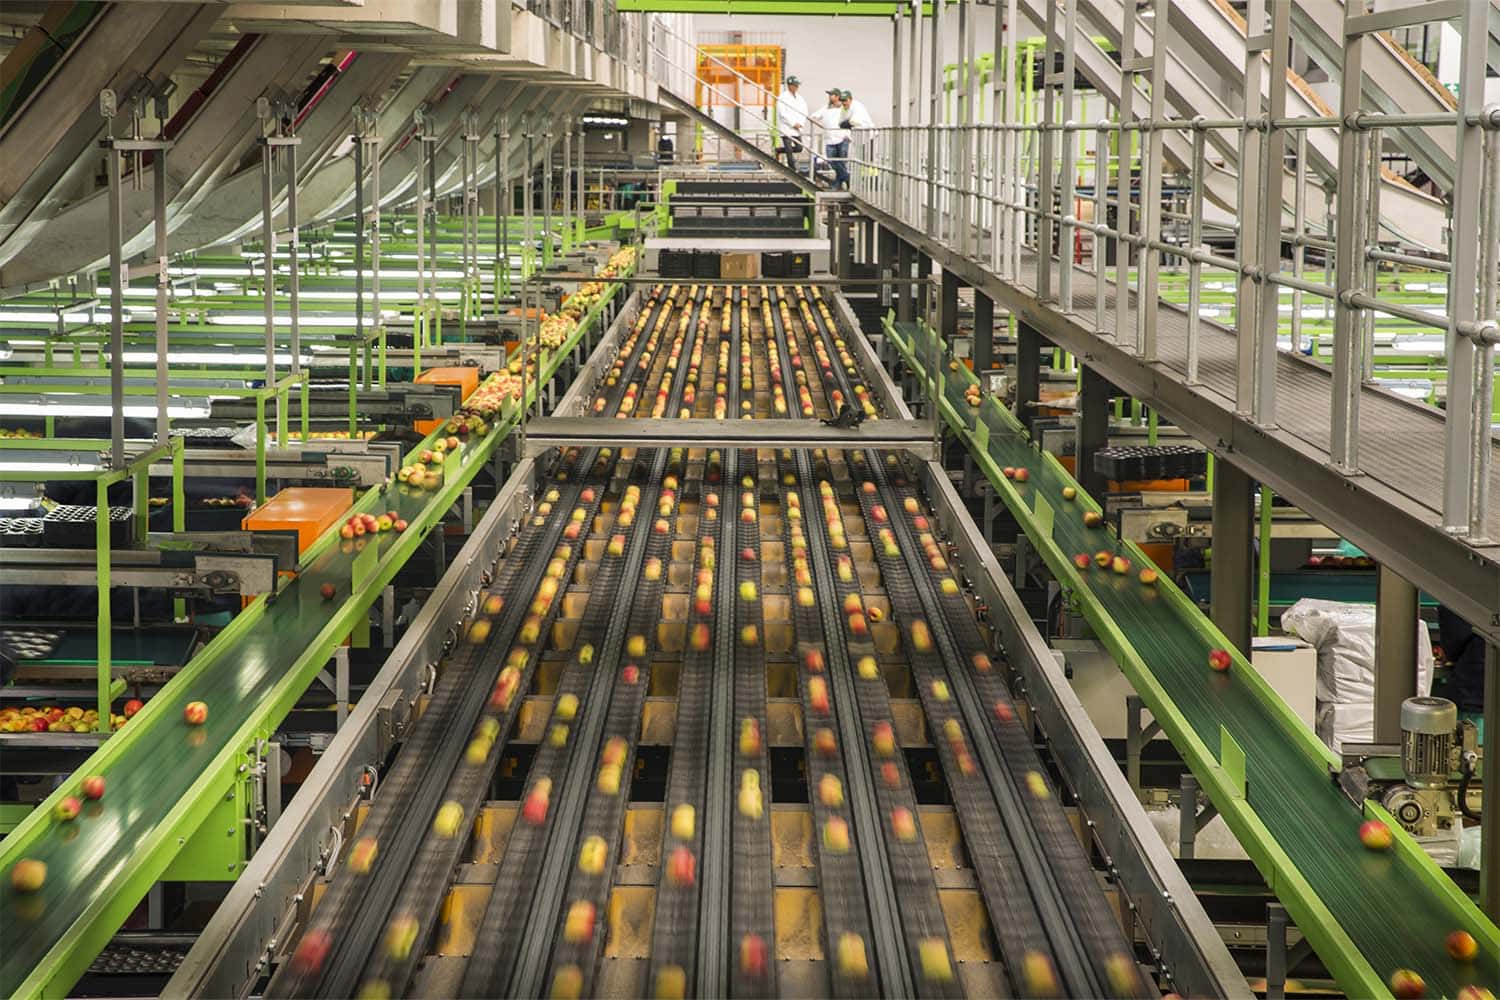 Conveyor belt with apples in a produce factory